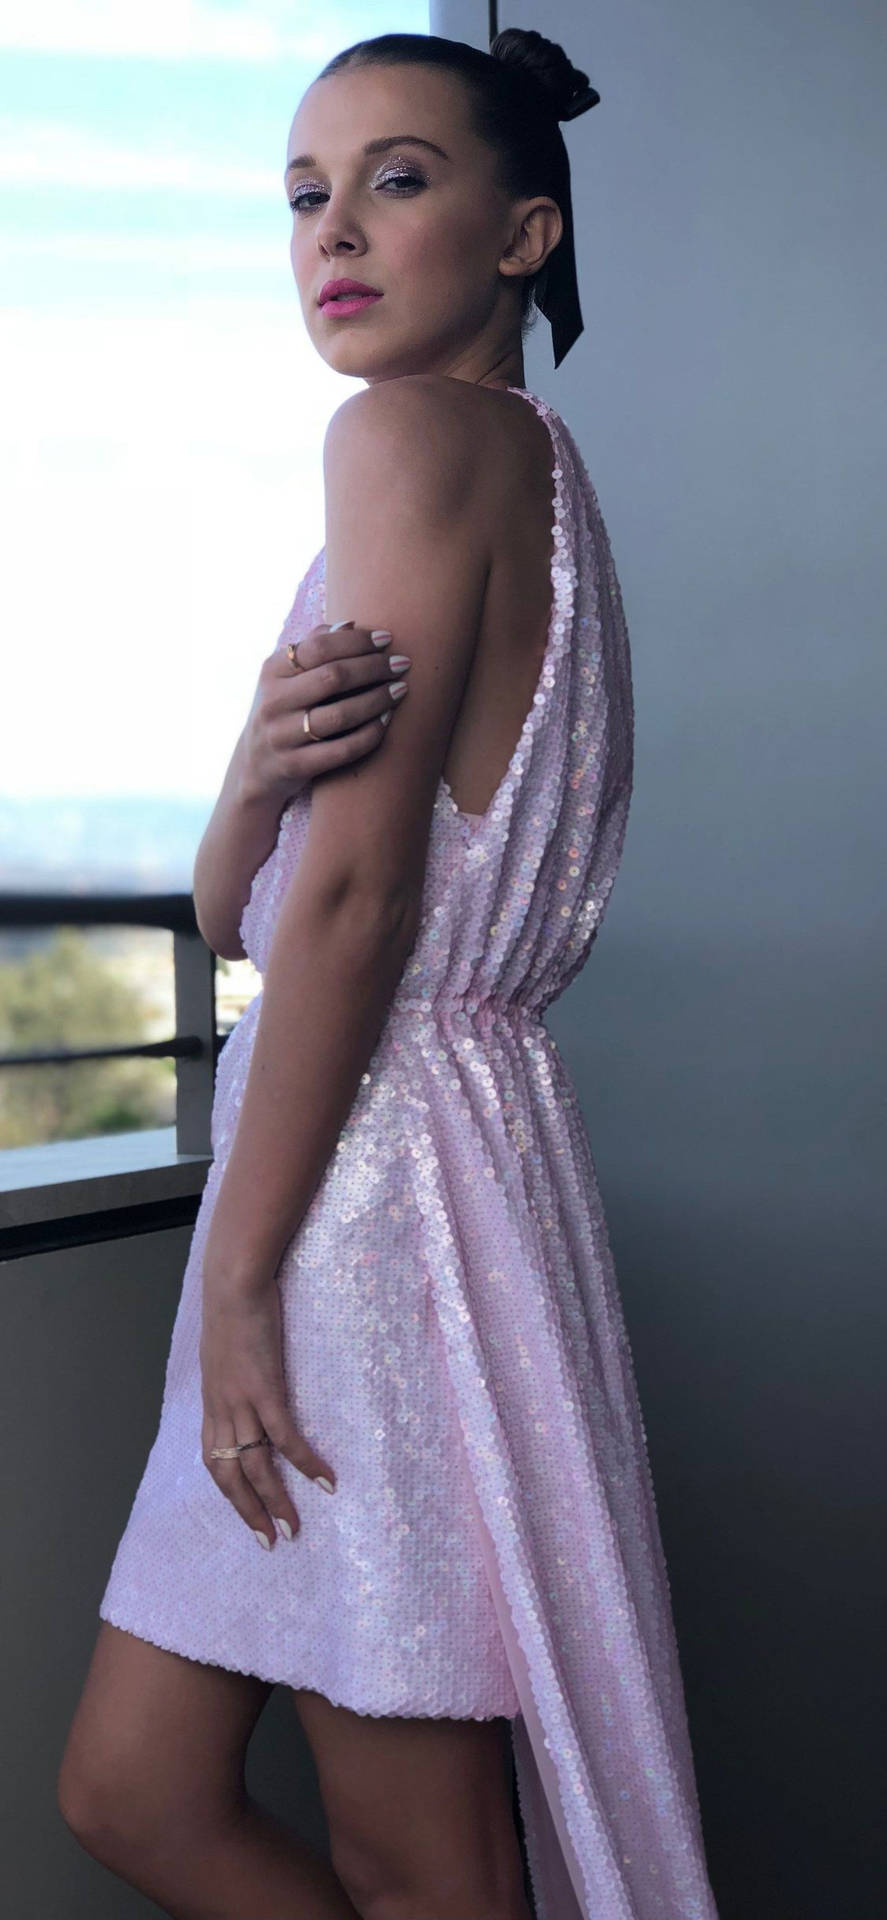 "Millie Bobby Brown looking stunning in a sparkly dress." Wallpaper